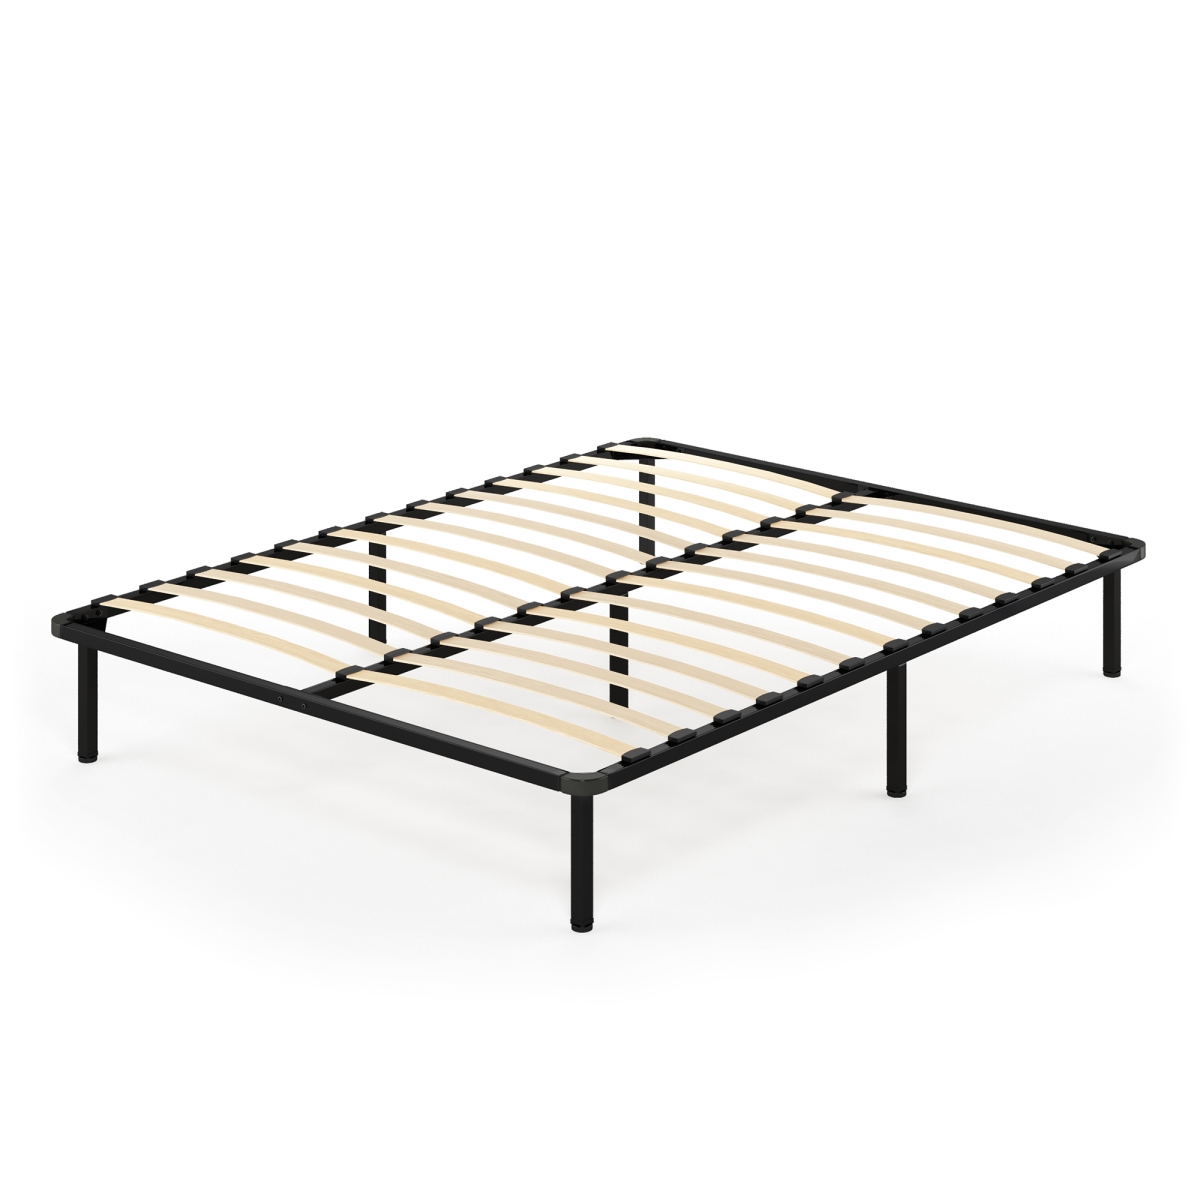 Fb3002q Angeland Cannet Metal Platform Bed Frame With Wooden Slats - Queen Size